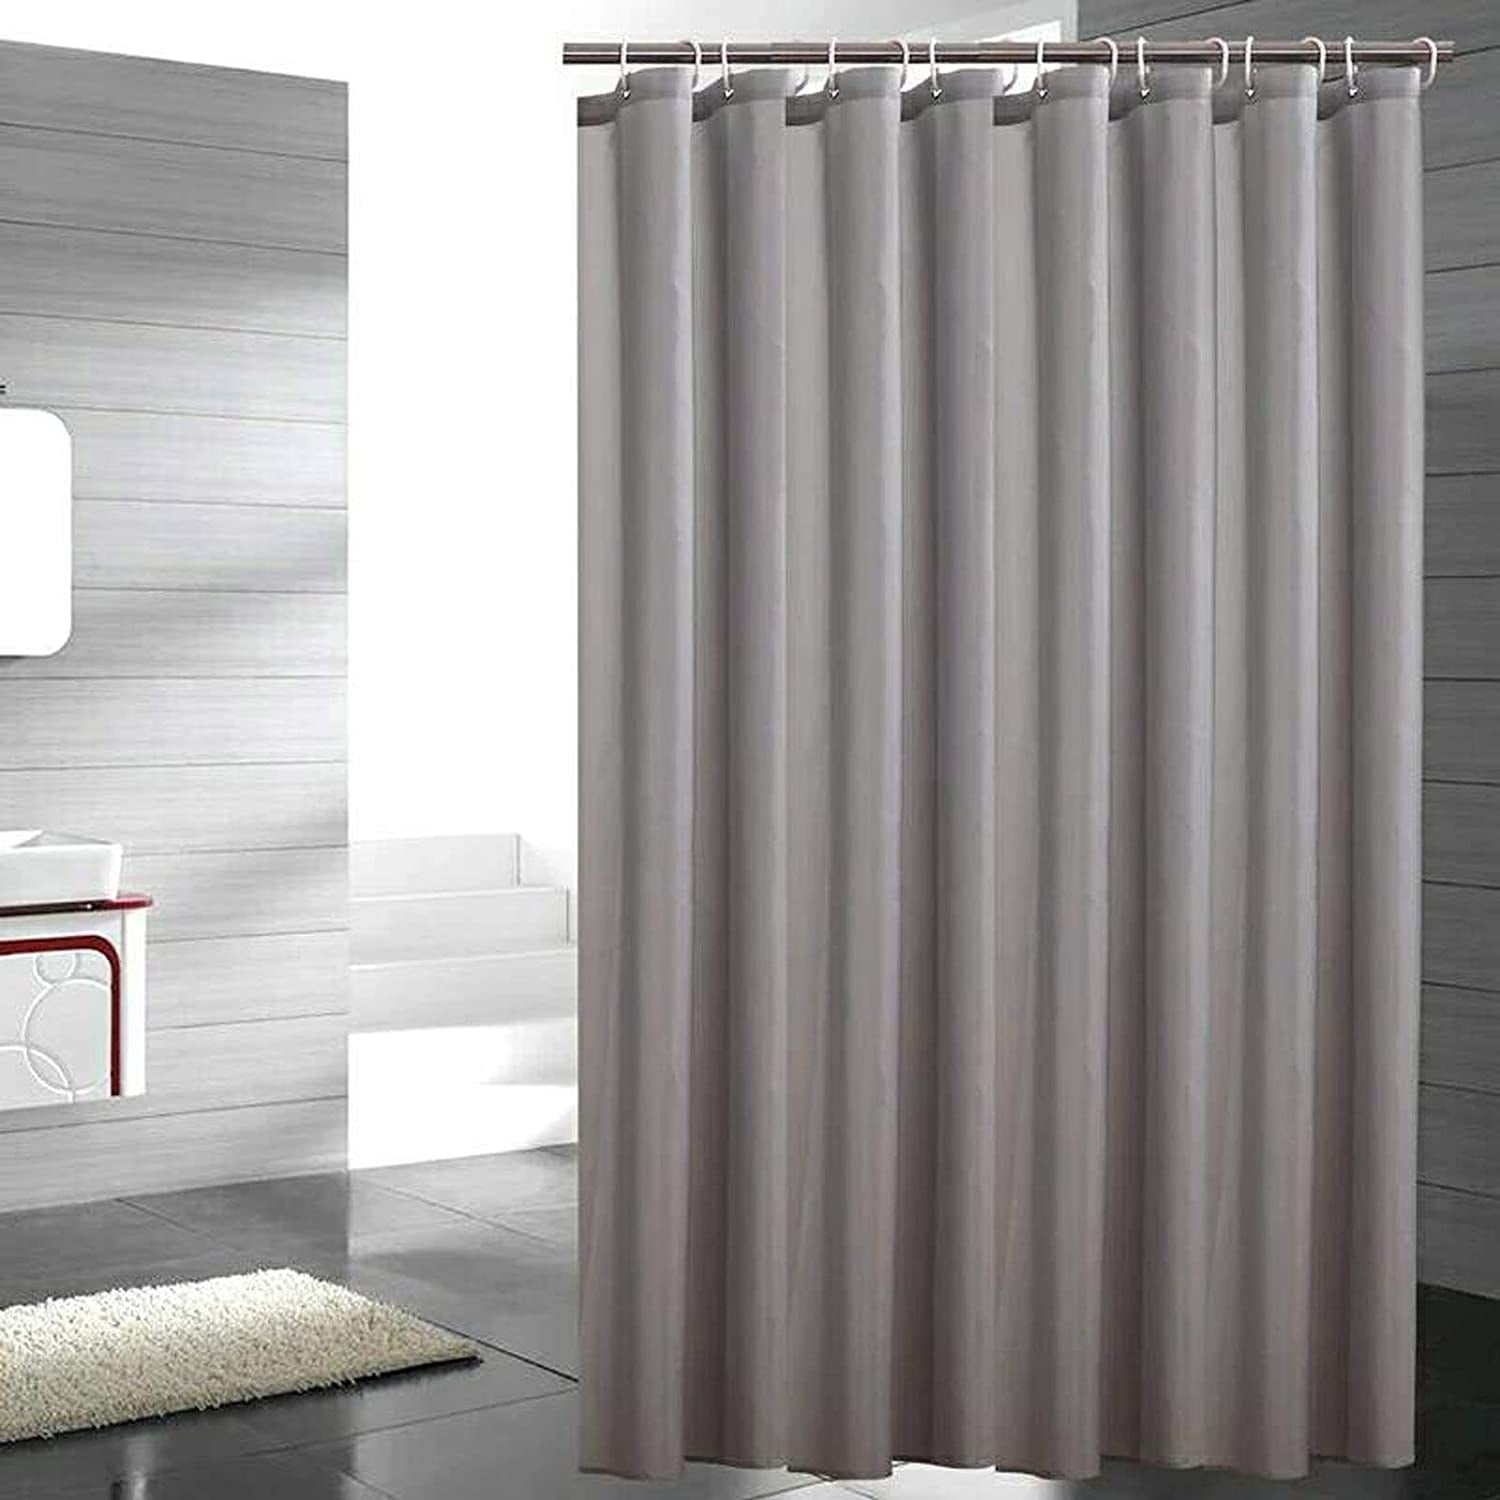 Shower Curtain Designer Anti-bacterial Liner with Rolling Ring 72"x72" UK Stock 